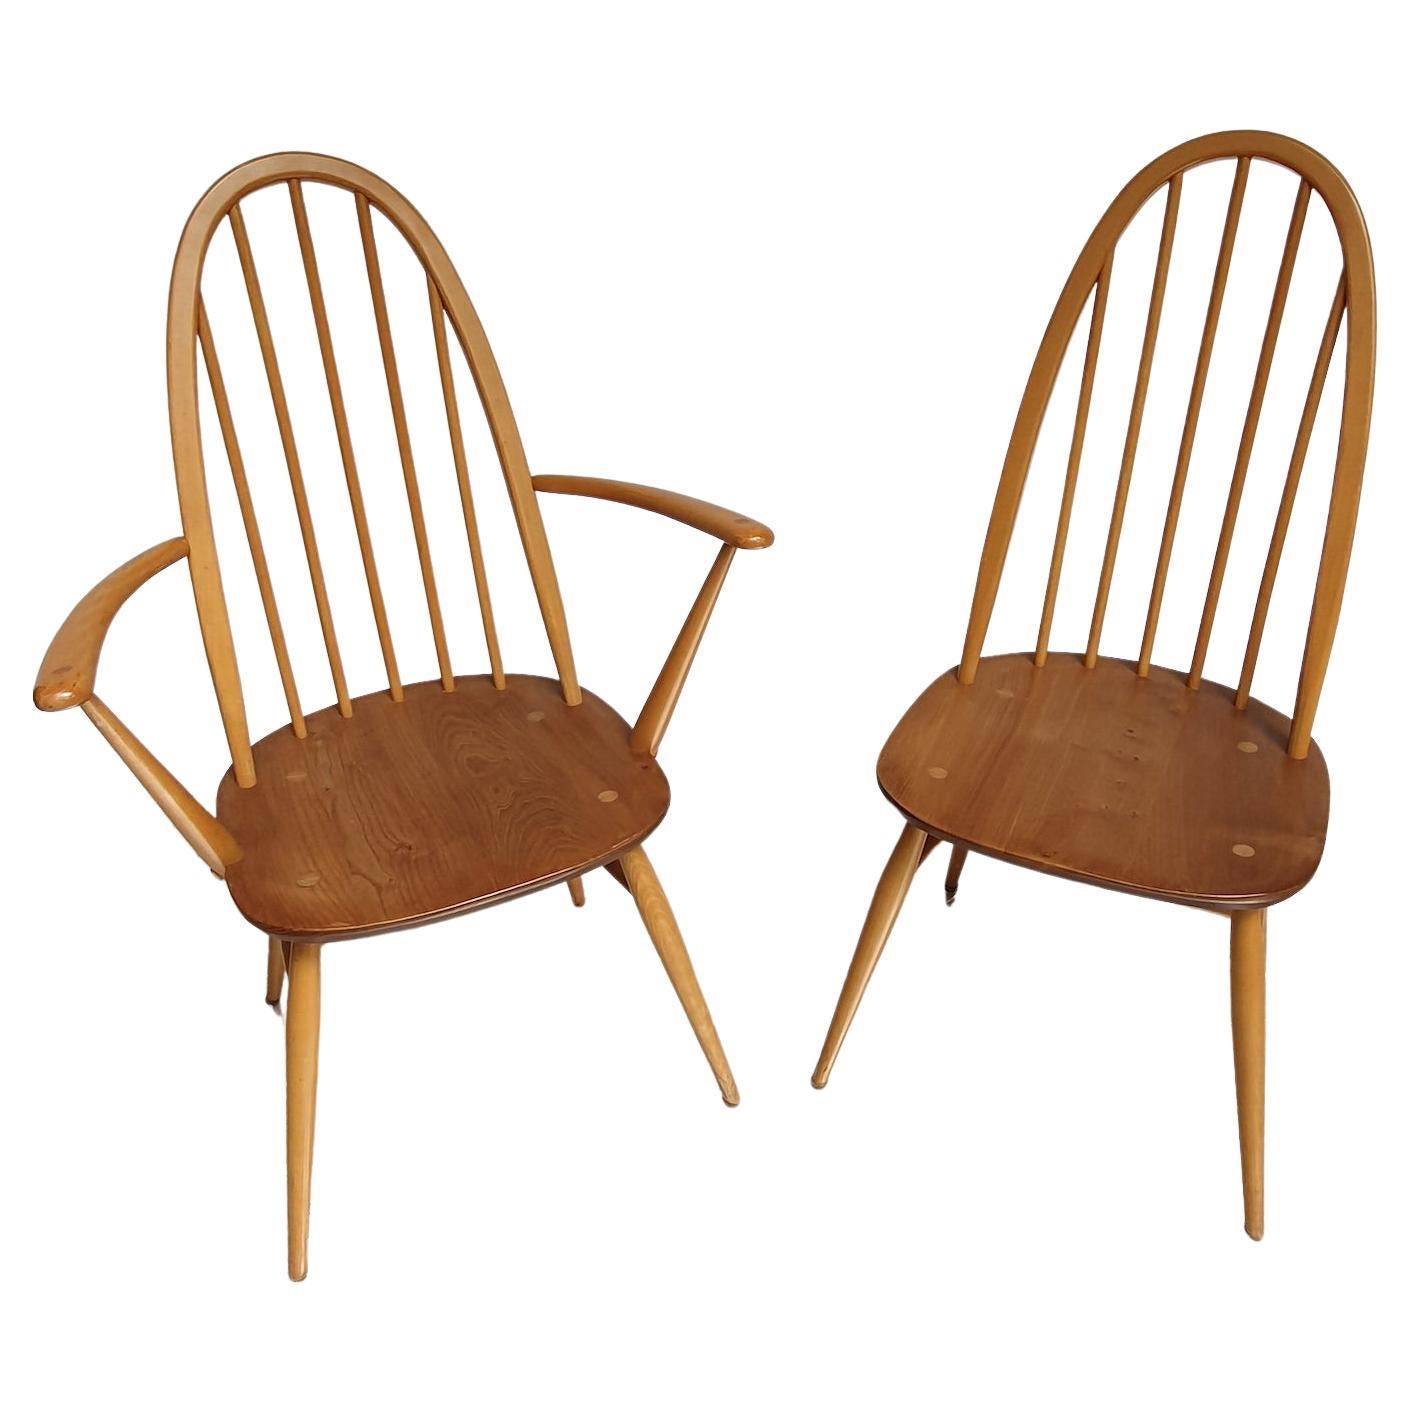 Lucian Ercolani, Pair of Armchair and Windsor Chair, Circa 1960